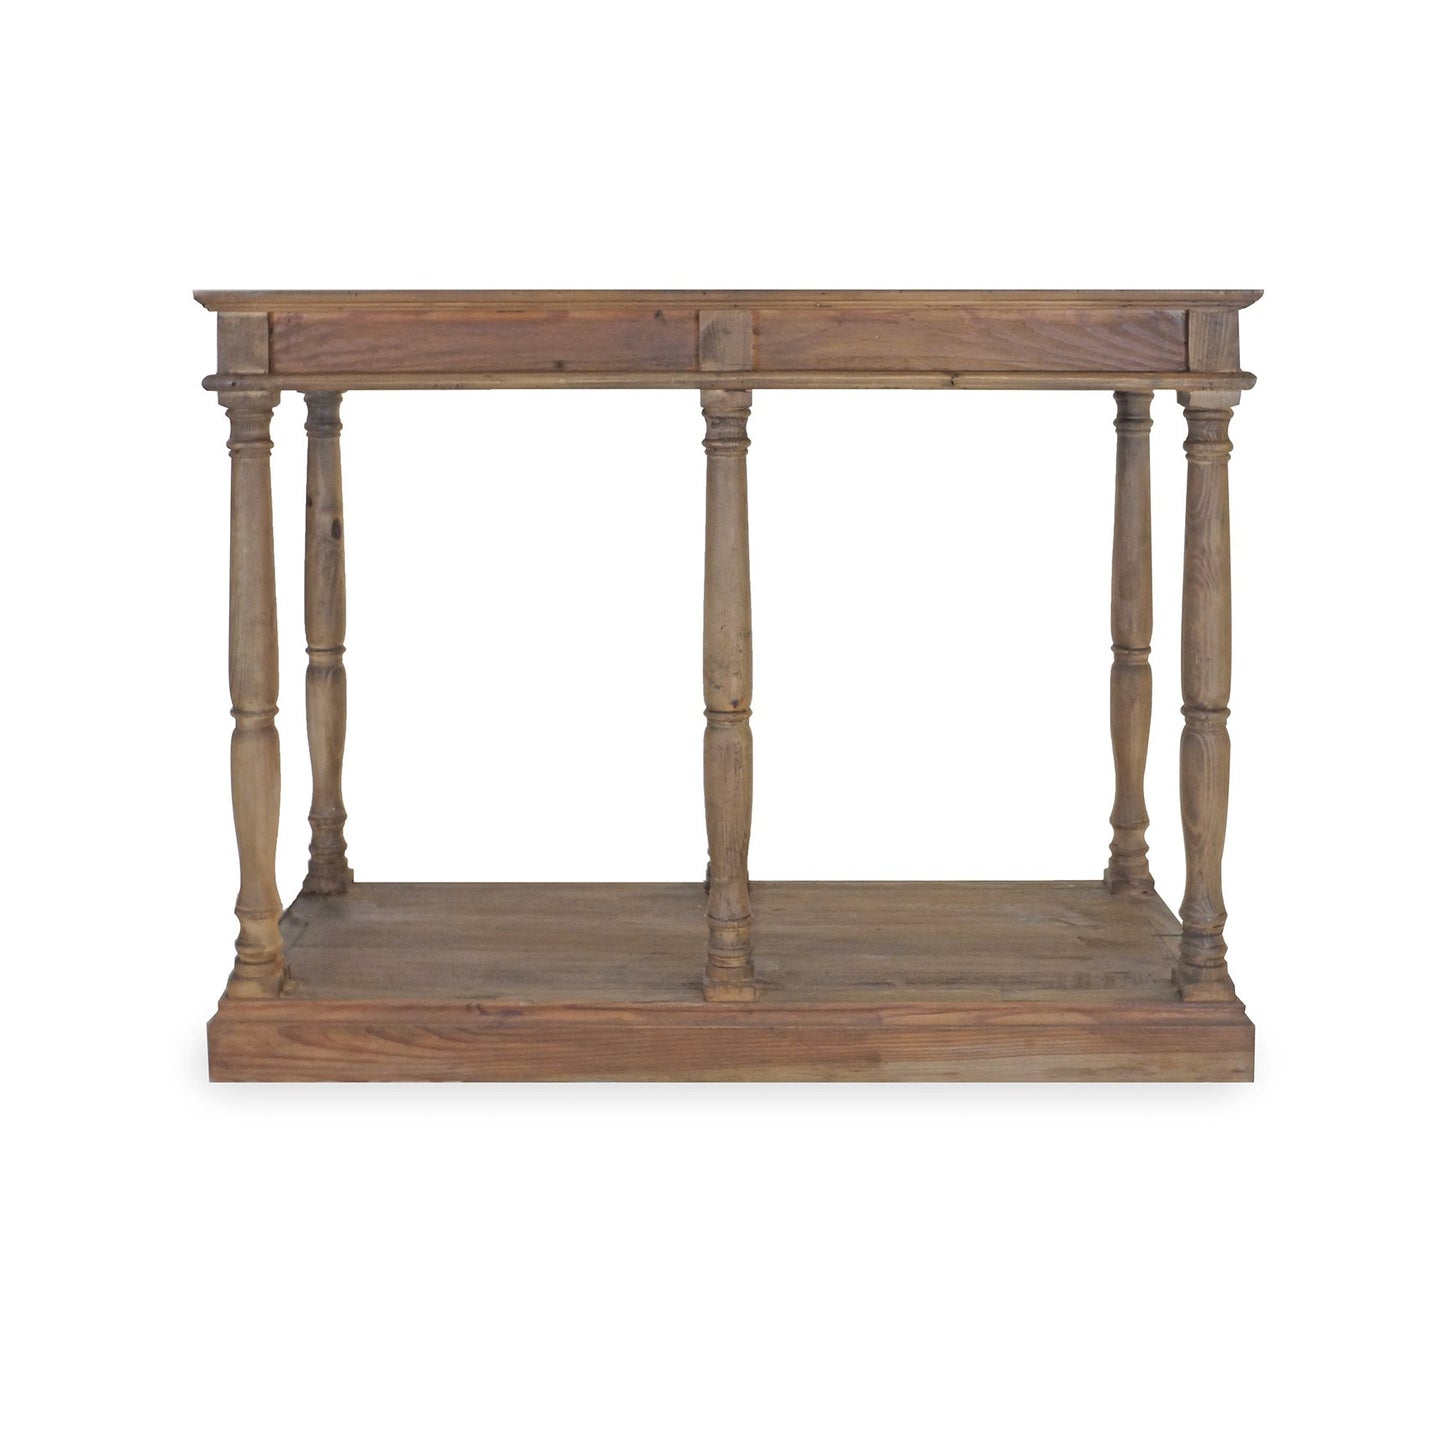 BALUSTRADE CONSOLE TABLE